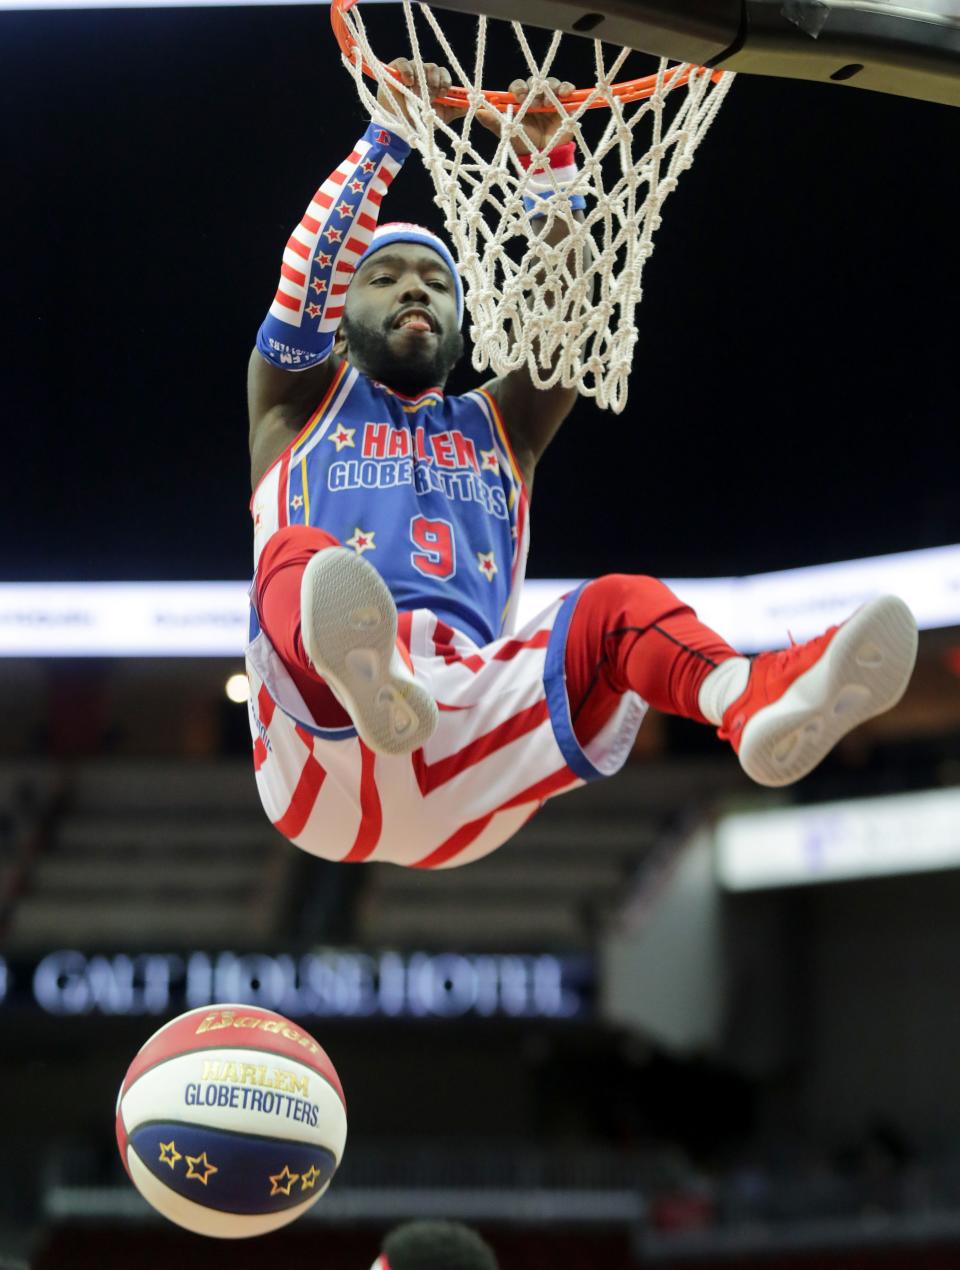 The Harlem Globetrotters will go toe to toe with the Washington Generals on Wednesday at the Schottenstein Center.